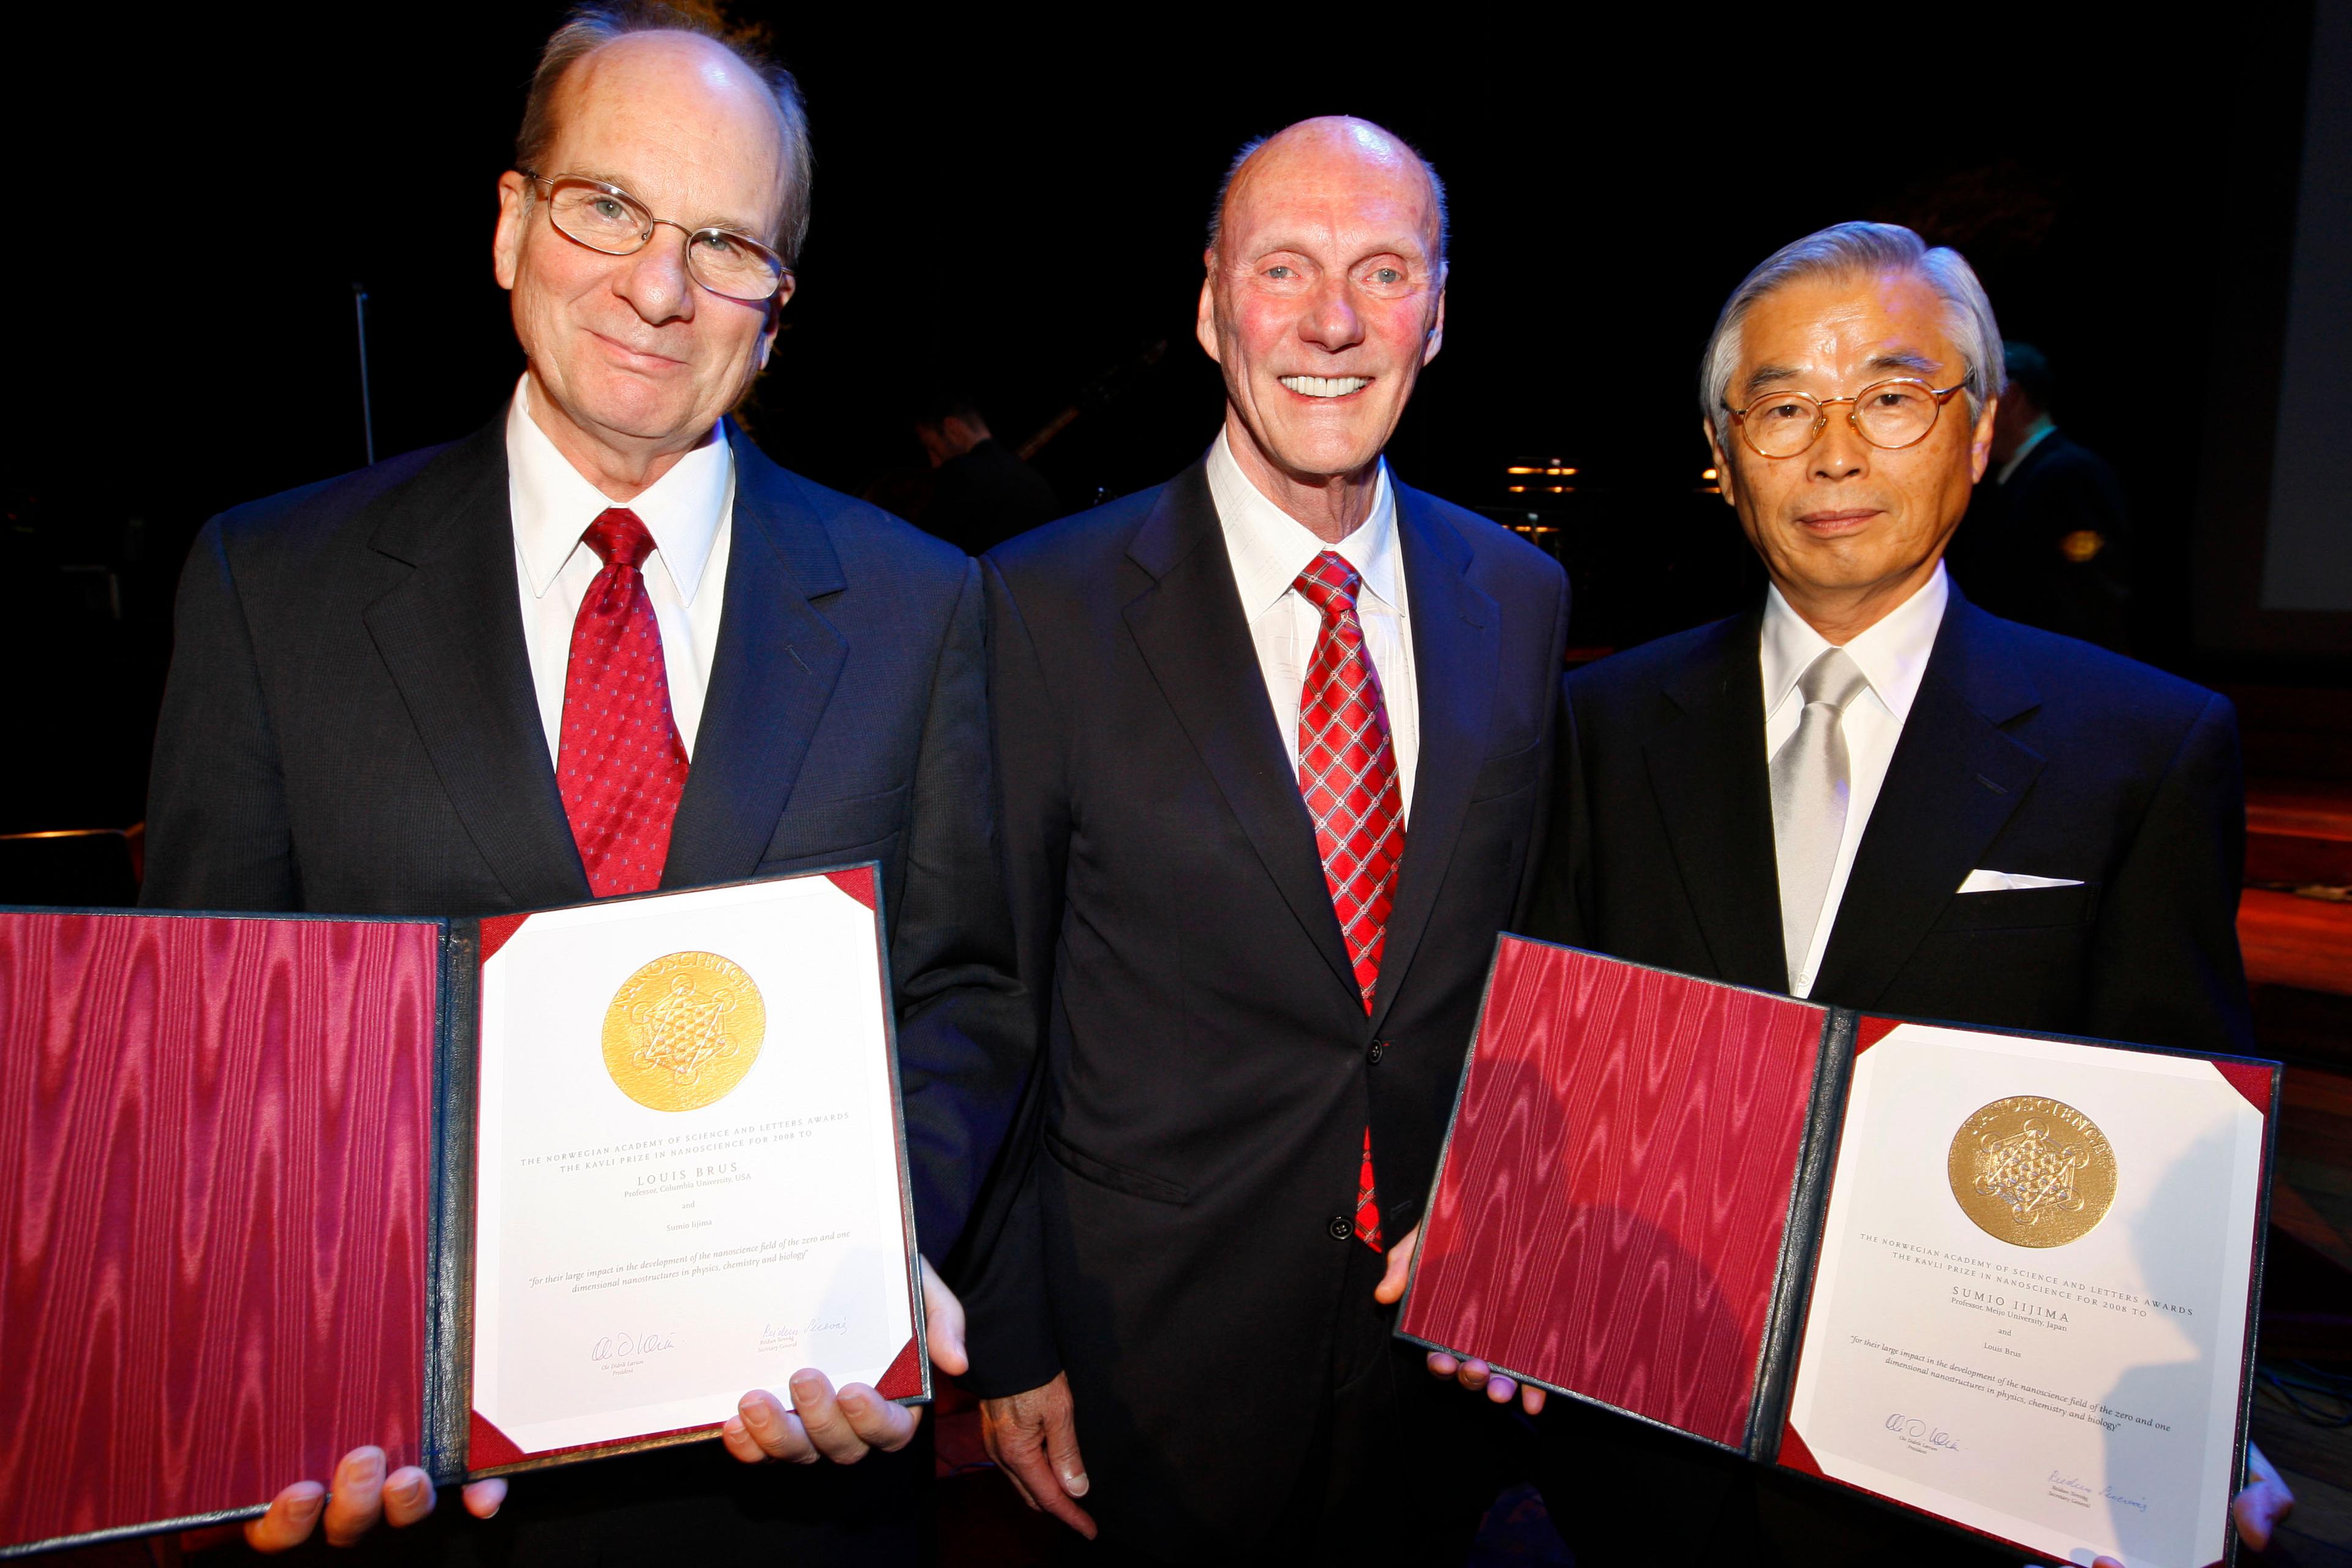 The 2008 Kavli Prize nanoscience laureates Louis E. Brus (left) and Sumio Iljima (right) together with Fred Kavli (middle)